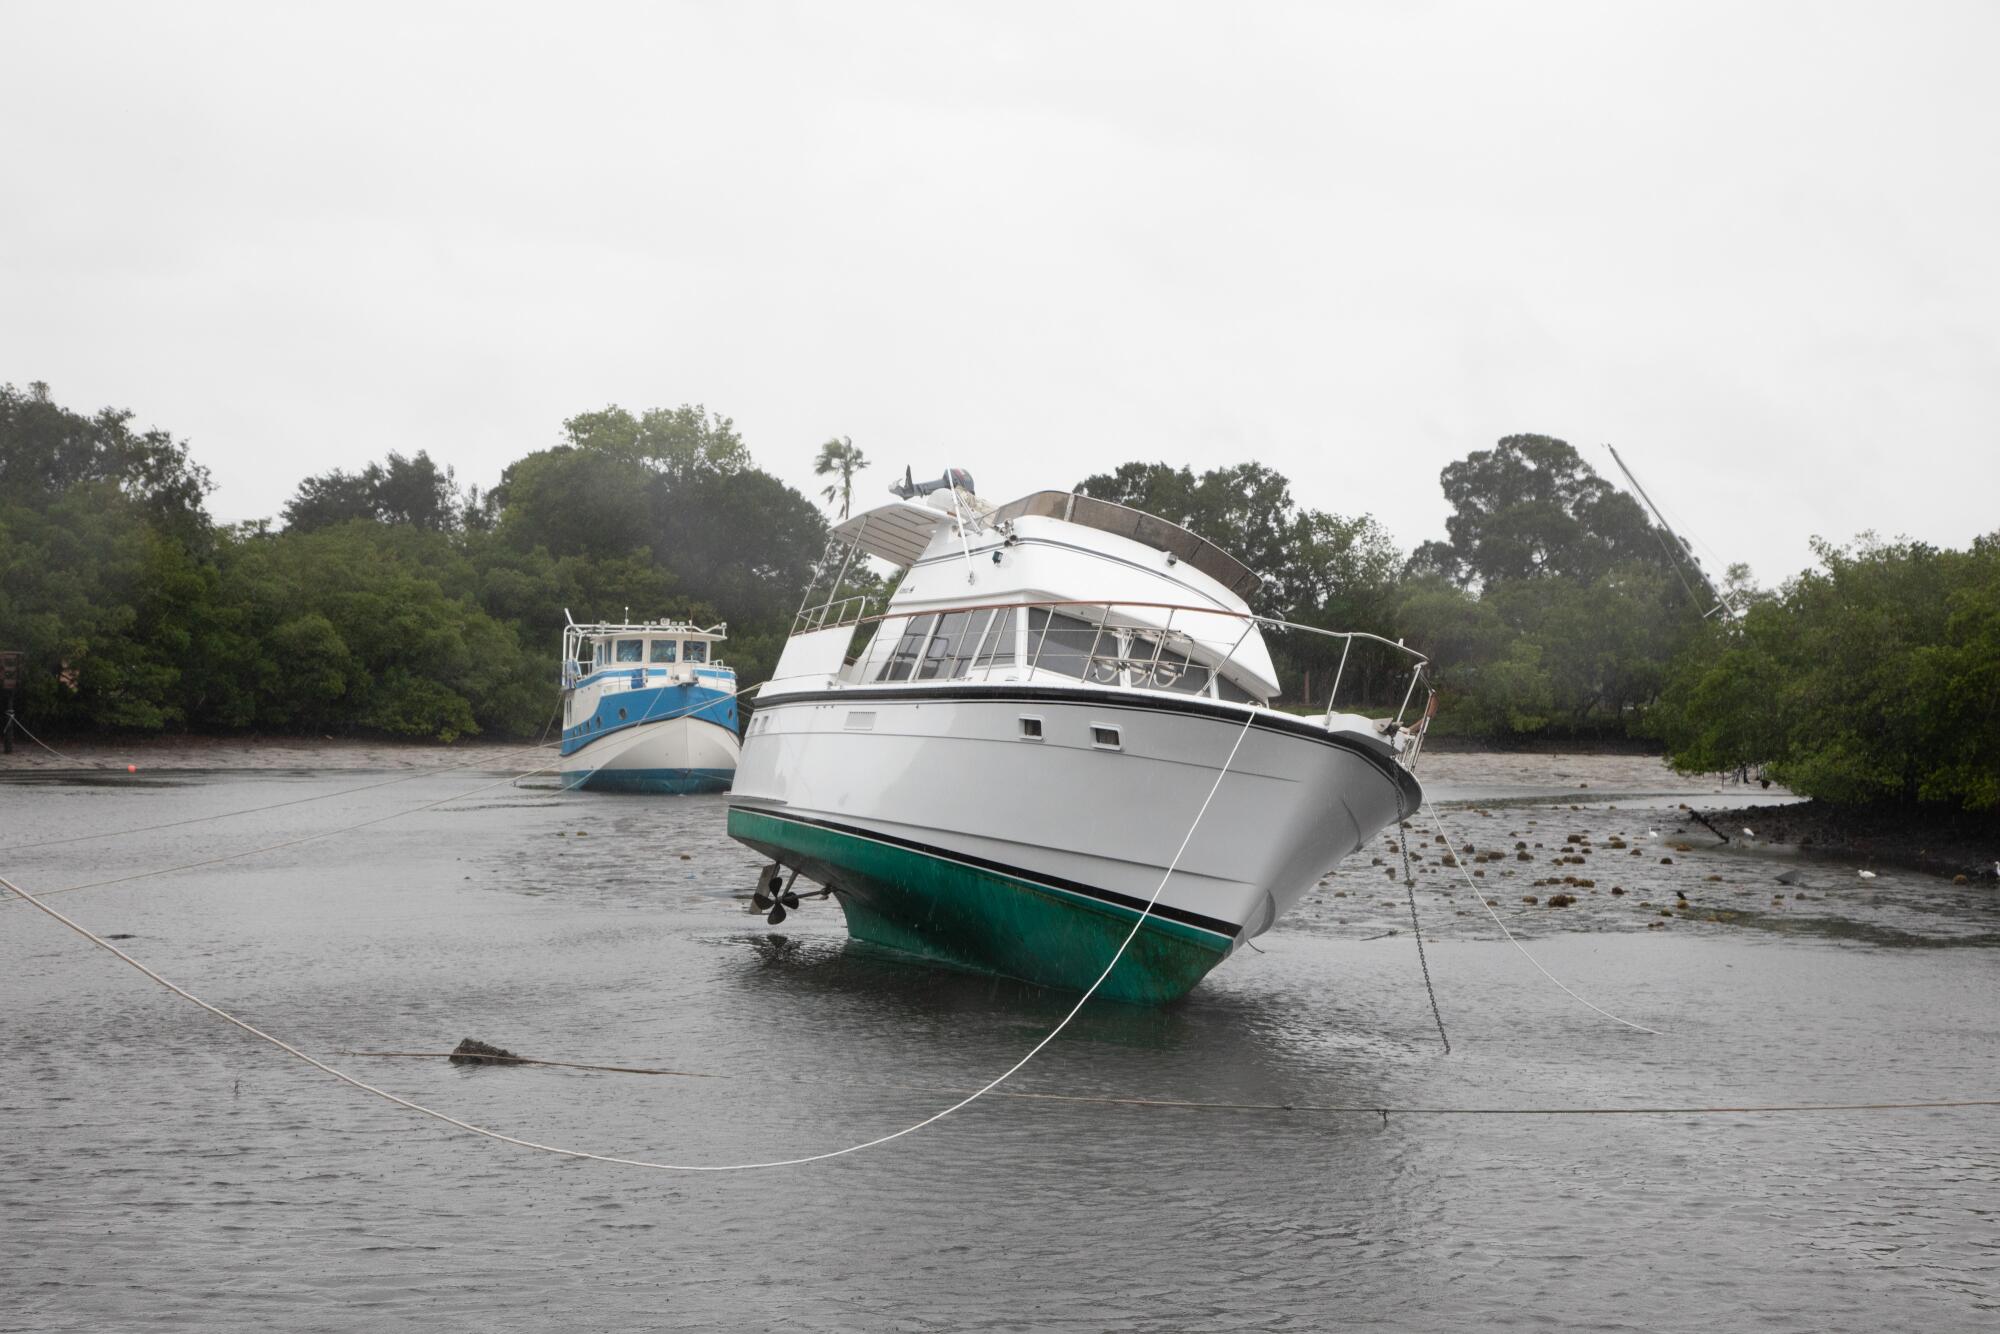 A boat sways in shallow water as Hurricane Ian approaches a neighborhood in St. Petersburg, Fla.